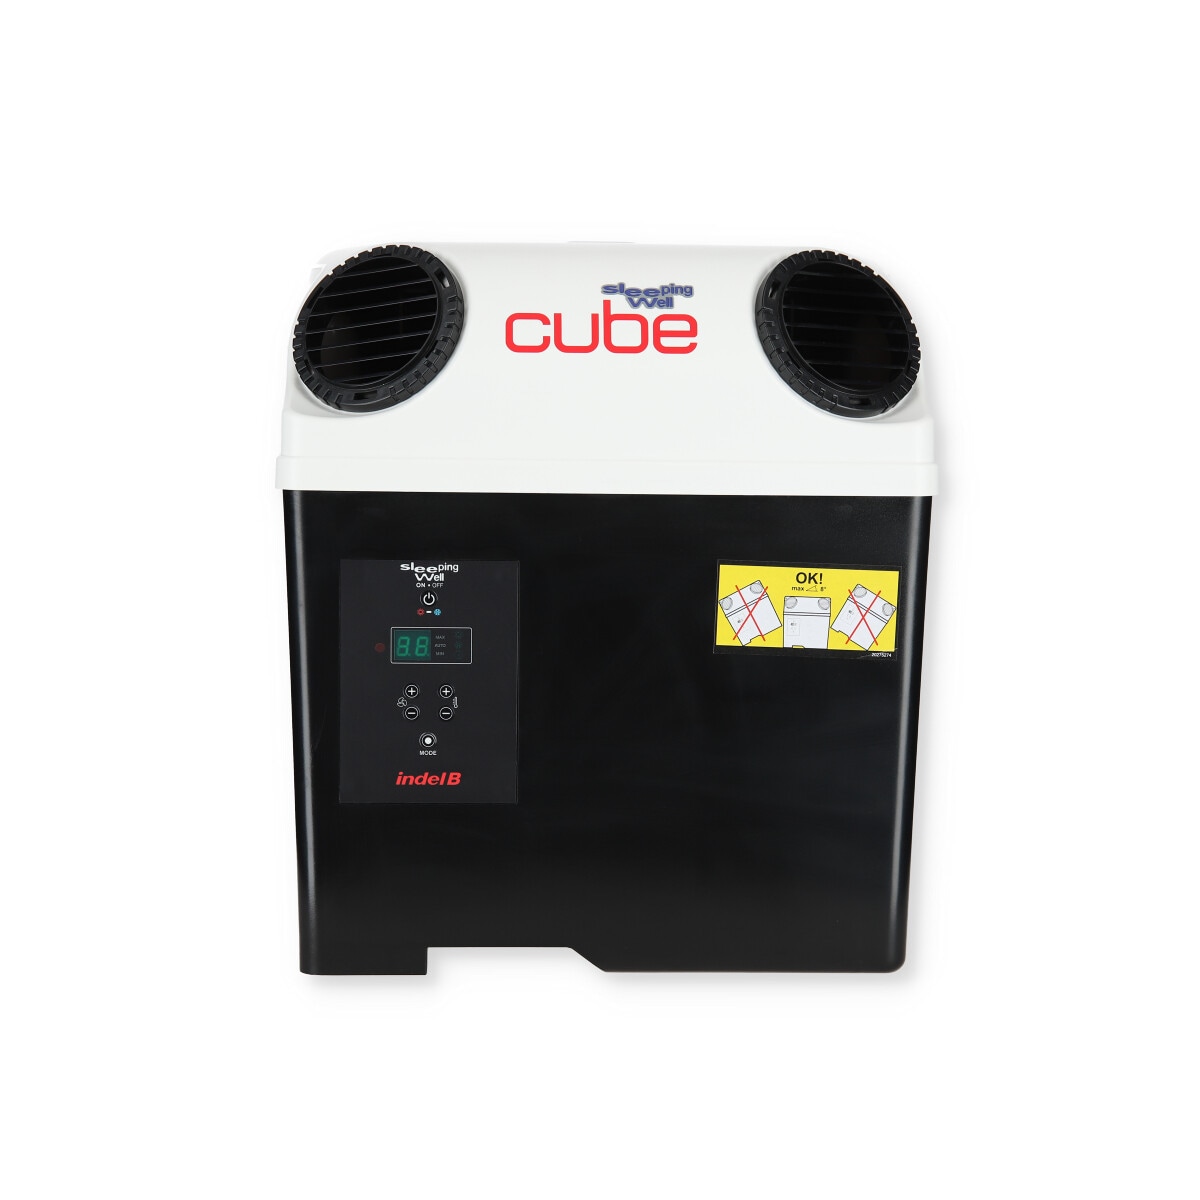 Off by indelB Sleeping Well Cube mobile 12V Klimaanlage bei